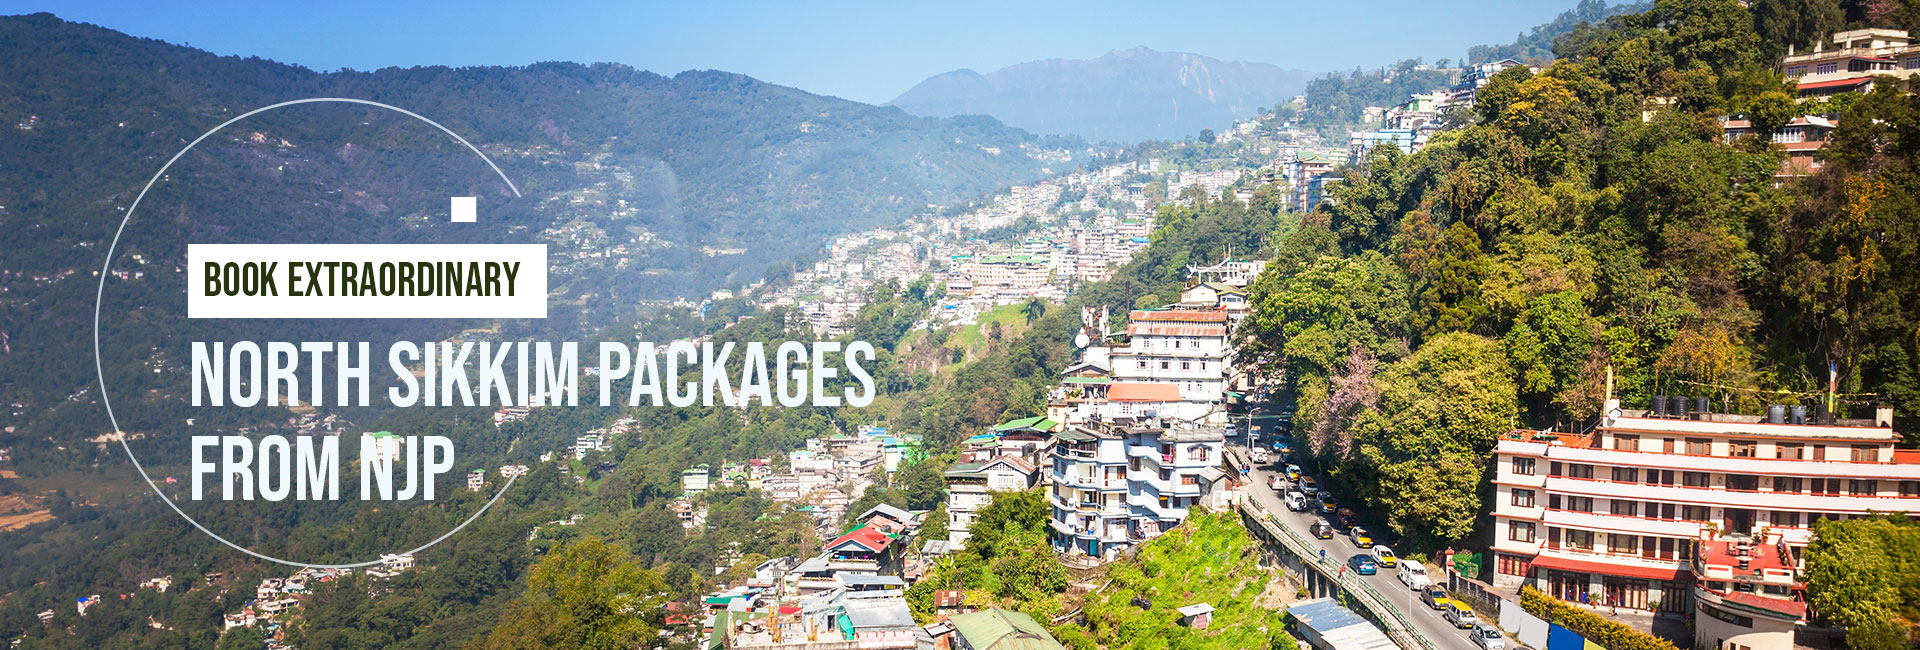 North Sikkim Packages From NJP - Be An Explorer